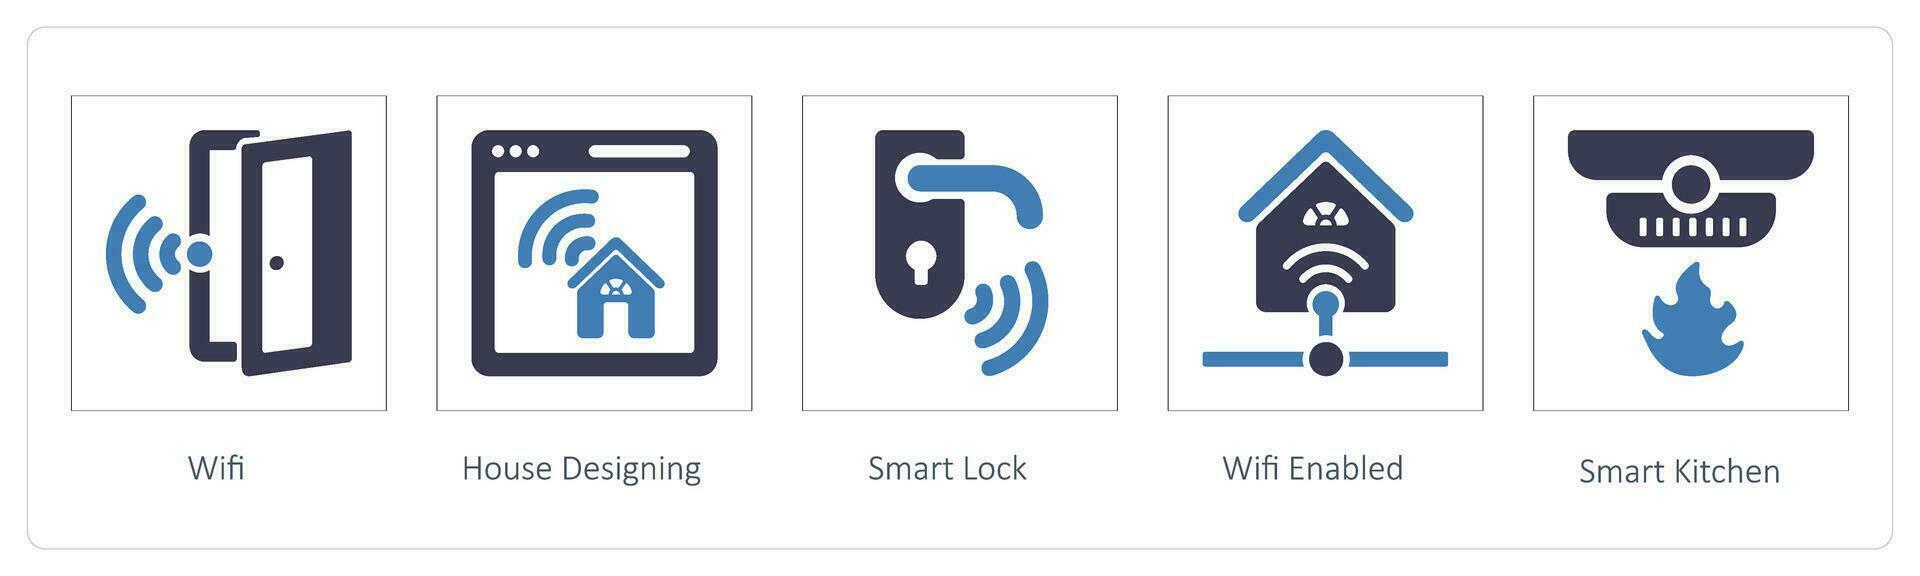 wifi, house designing and Smart Lock vector